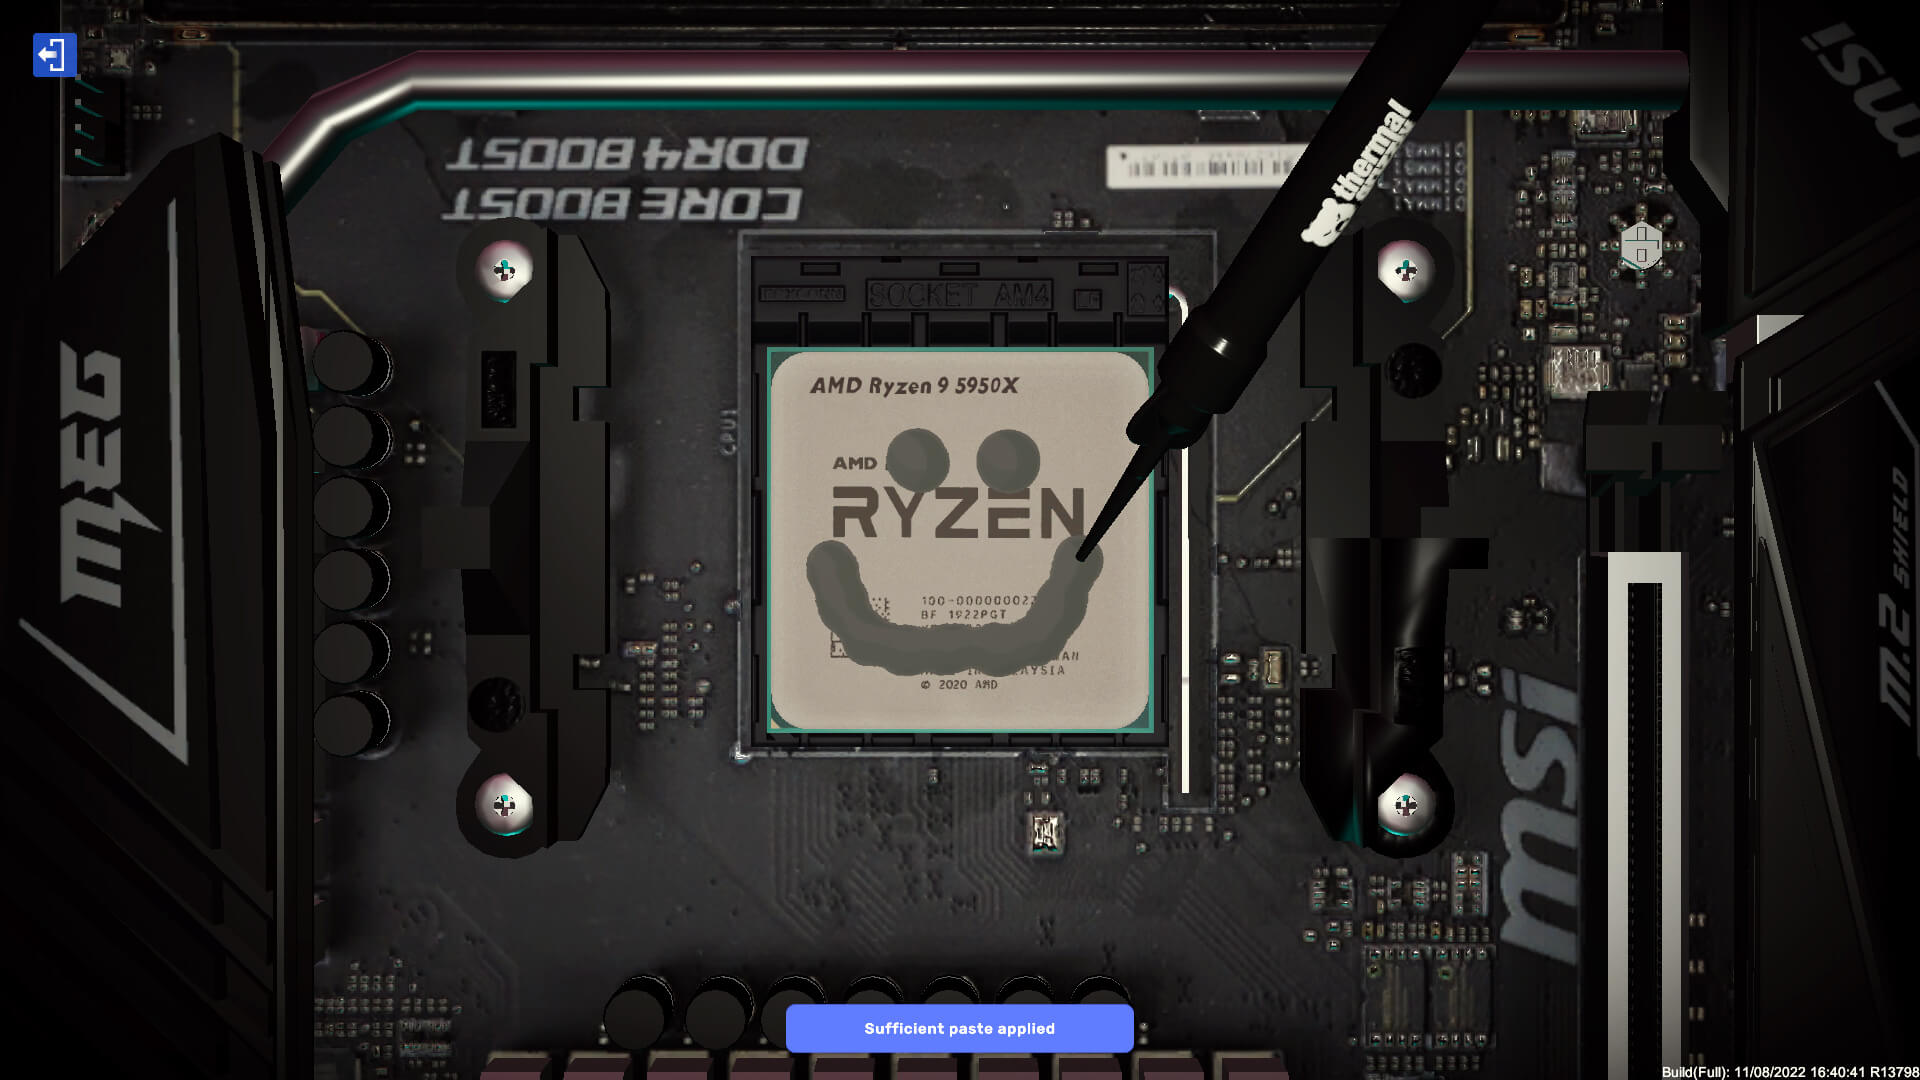 A screenshot from PC Building Simulator 2, in which a AMD Ryzen processor can be seen in a motherboard, with thermal paste on top of it that's been drawn in a way to resemble a smiling face